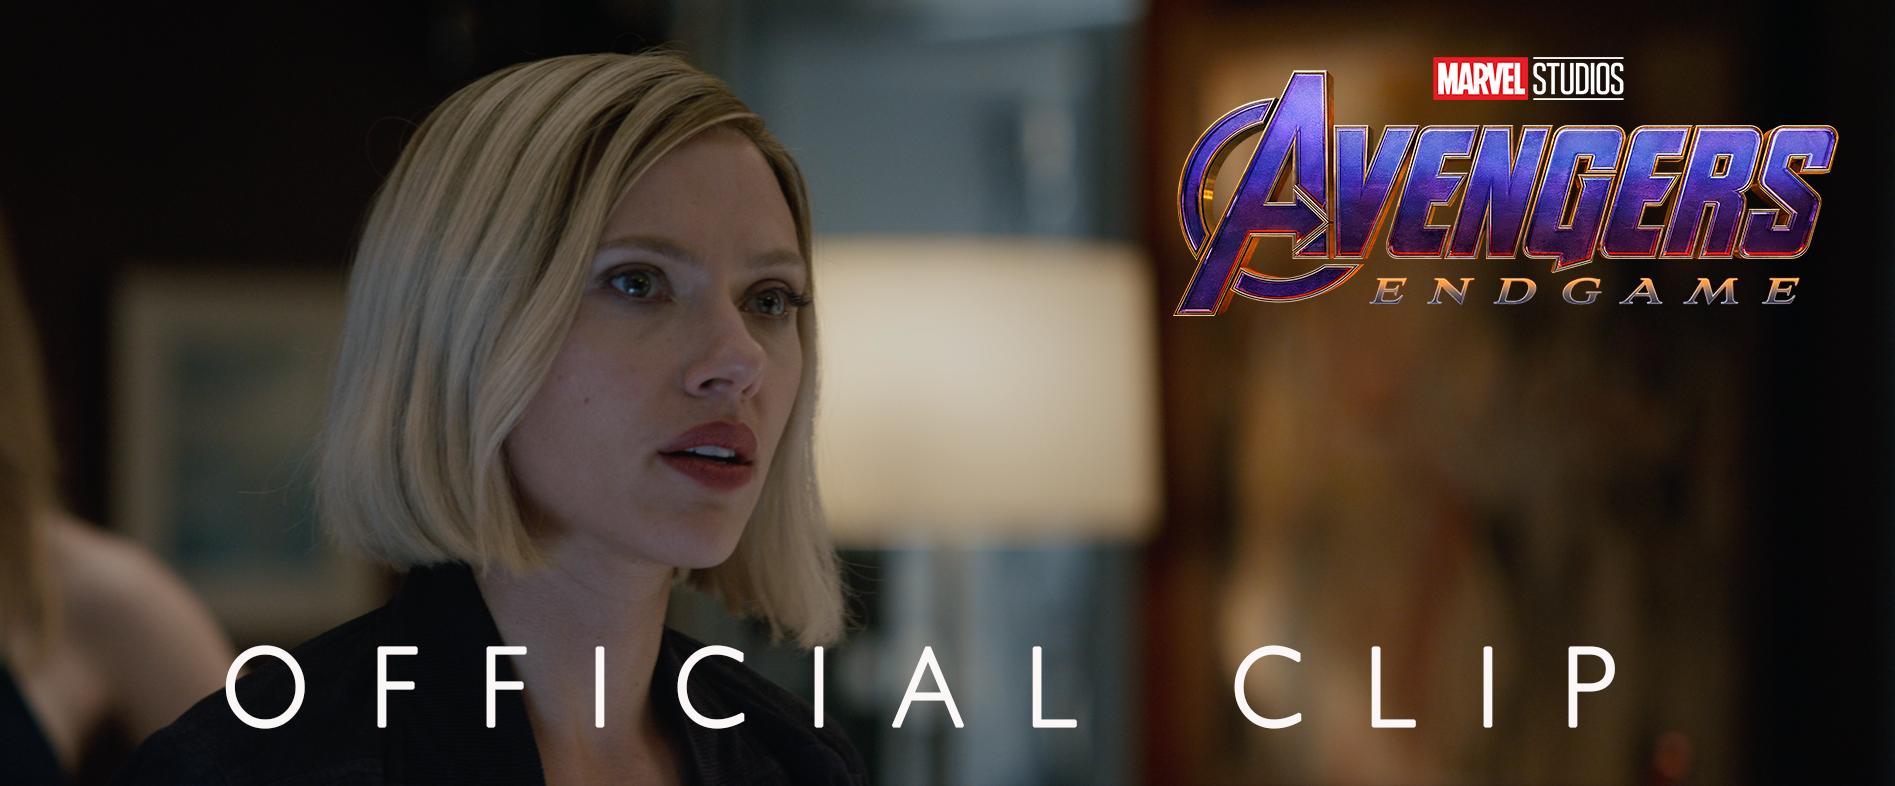 Supresión camioneta vanidad Avengers on Twitter: "“We owe it to everyone not in this room to try.”  Watch a brand new clip from Marvel Studios' #AvengersEndgame, in theaters  April 26. Get tickets now: https://t.co/93jQYXAc6I https://t.co/BgueHNOQqP"  /